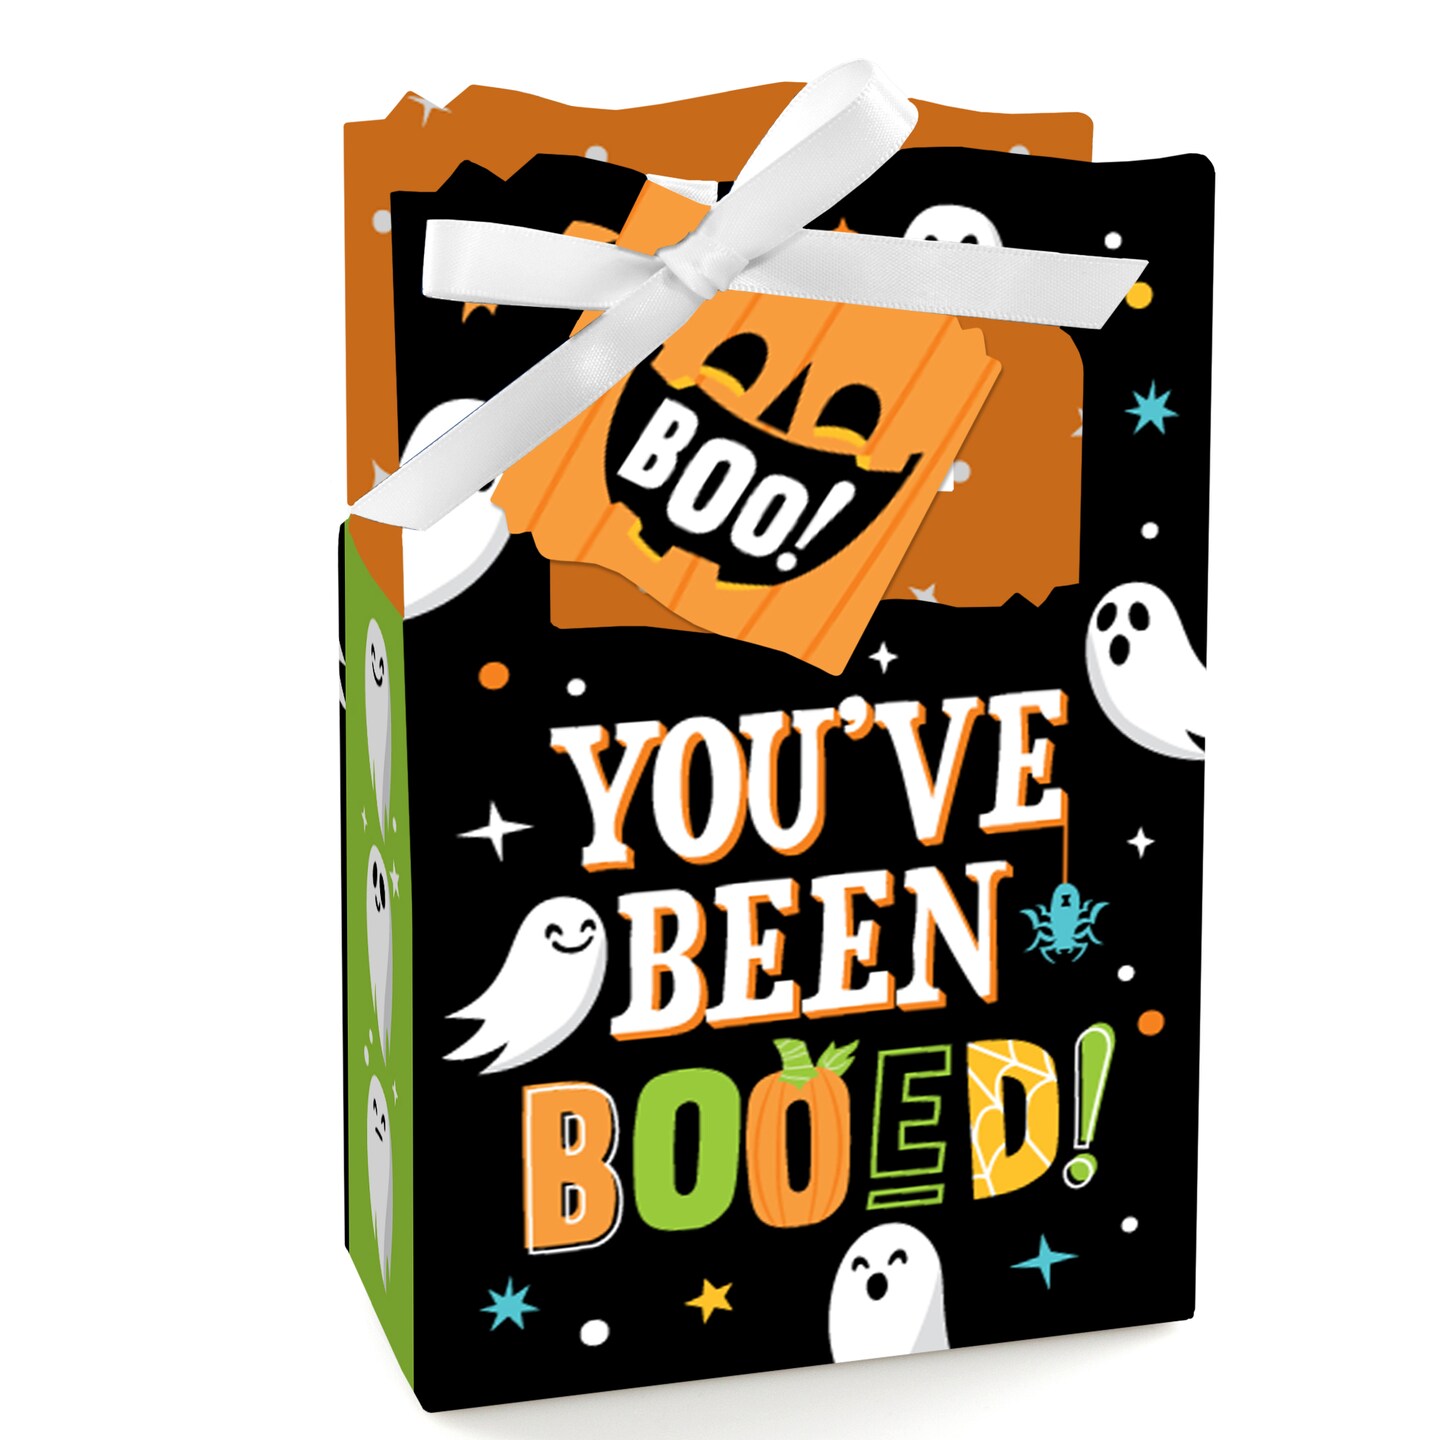 Boo Halloween Party Gift Box